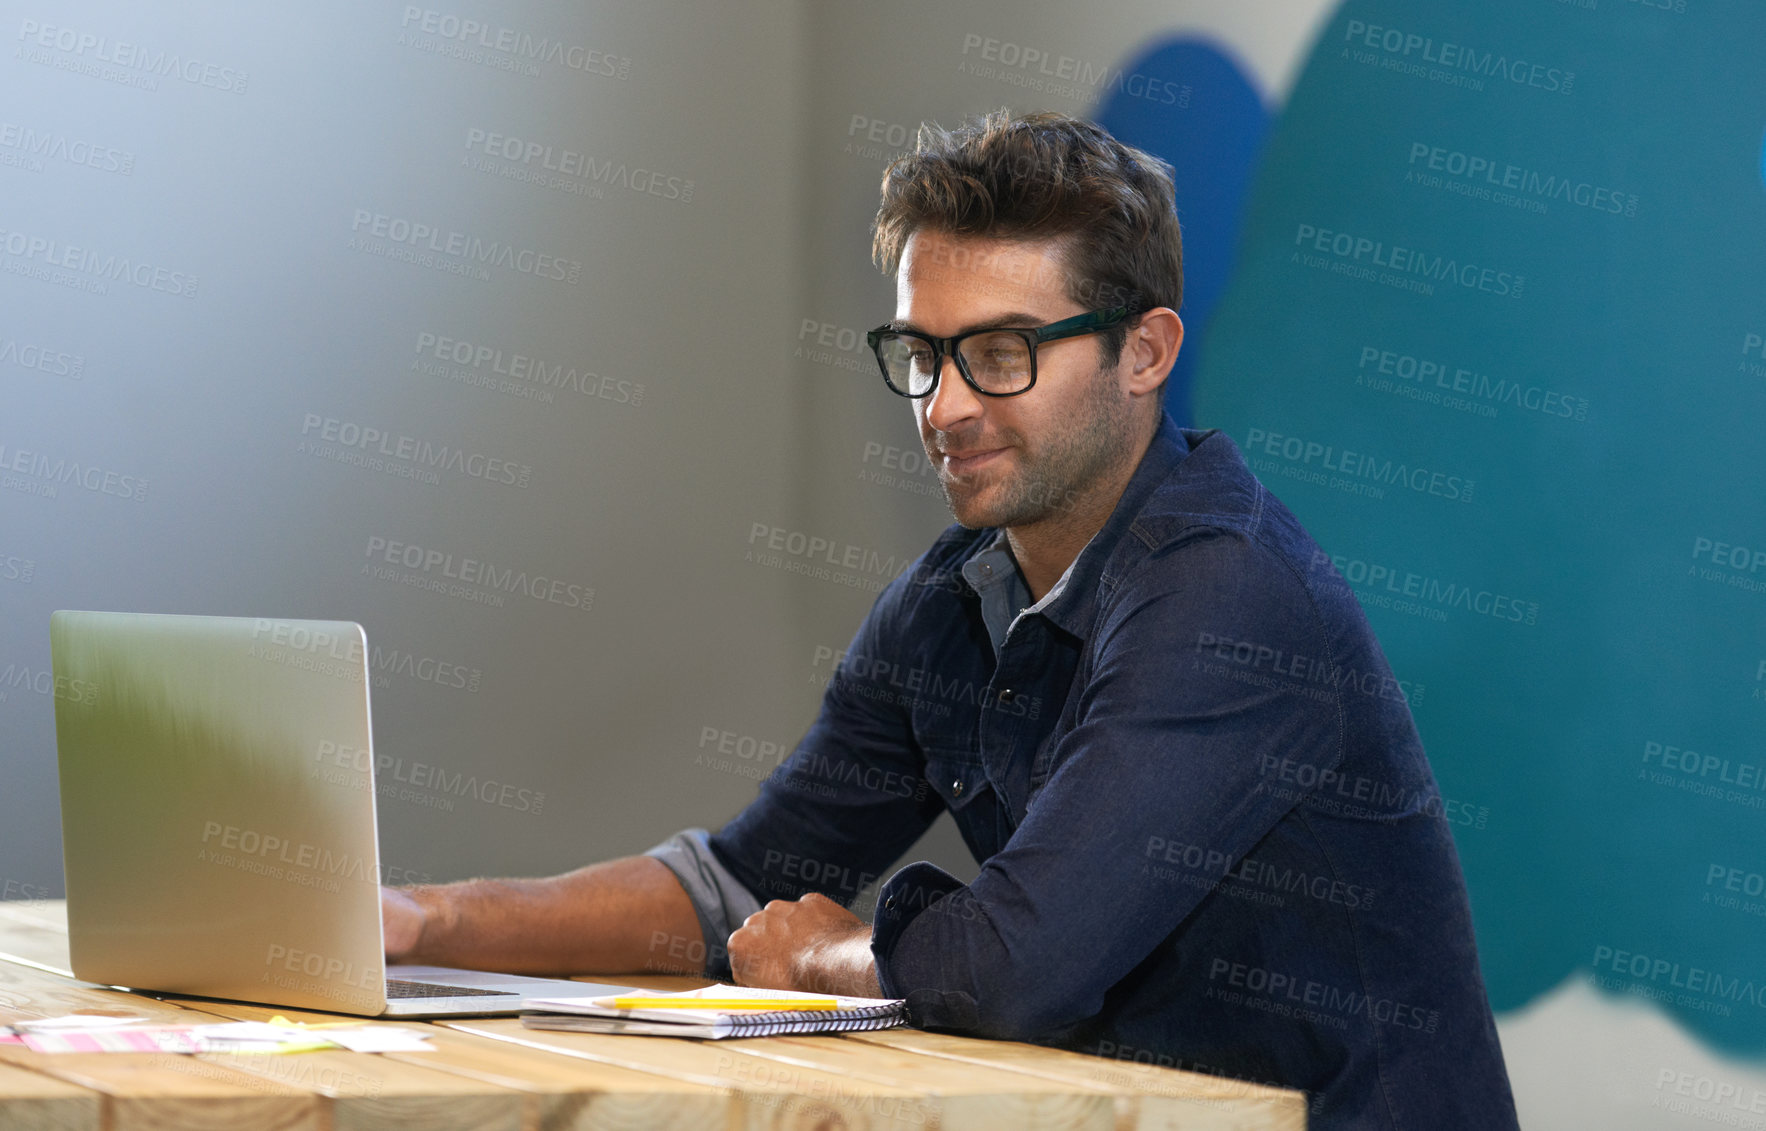 Buy stock photo Smile, creative and man at laptop thinking for ideas, online research and reading email in office with glasses. Brainstorming, computer and designer at desk with business plan in professional career